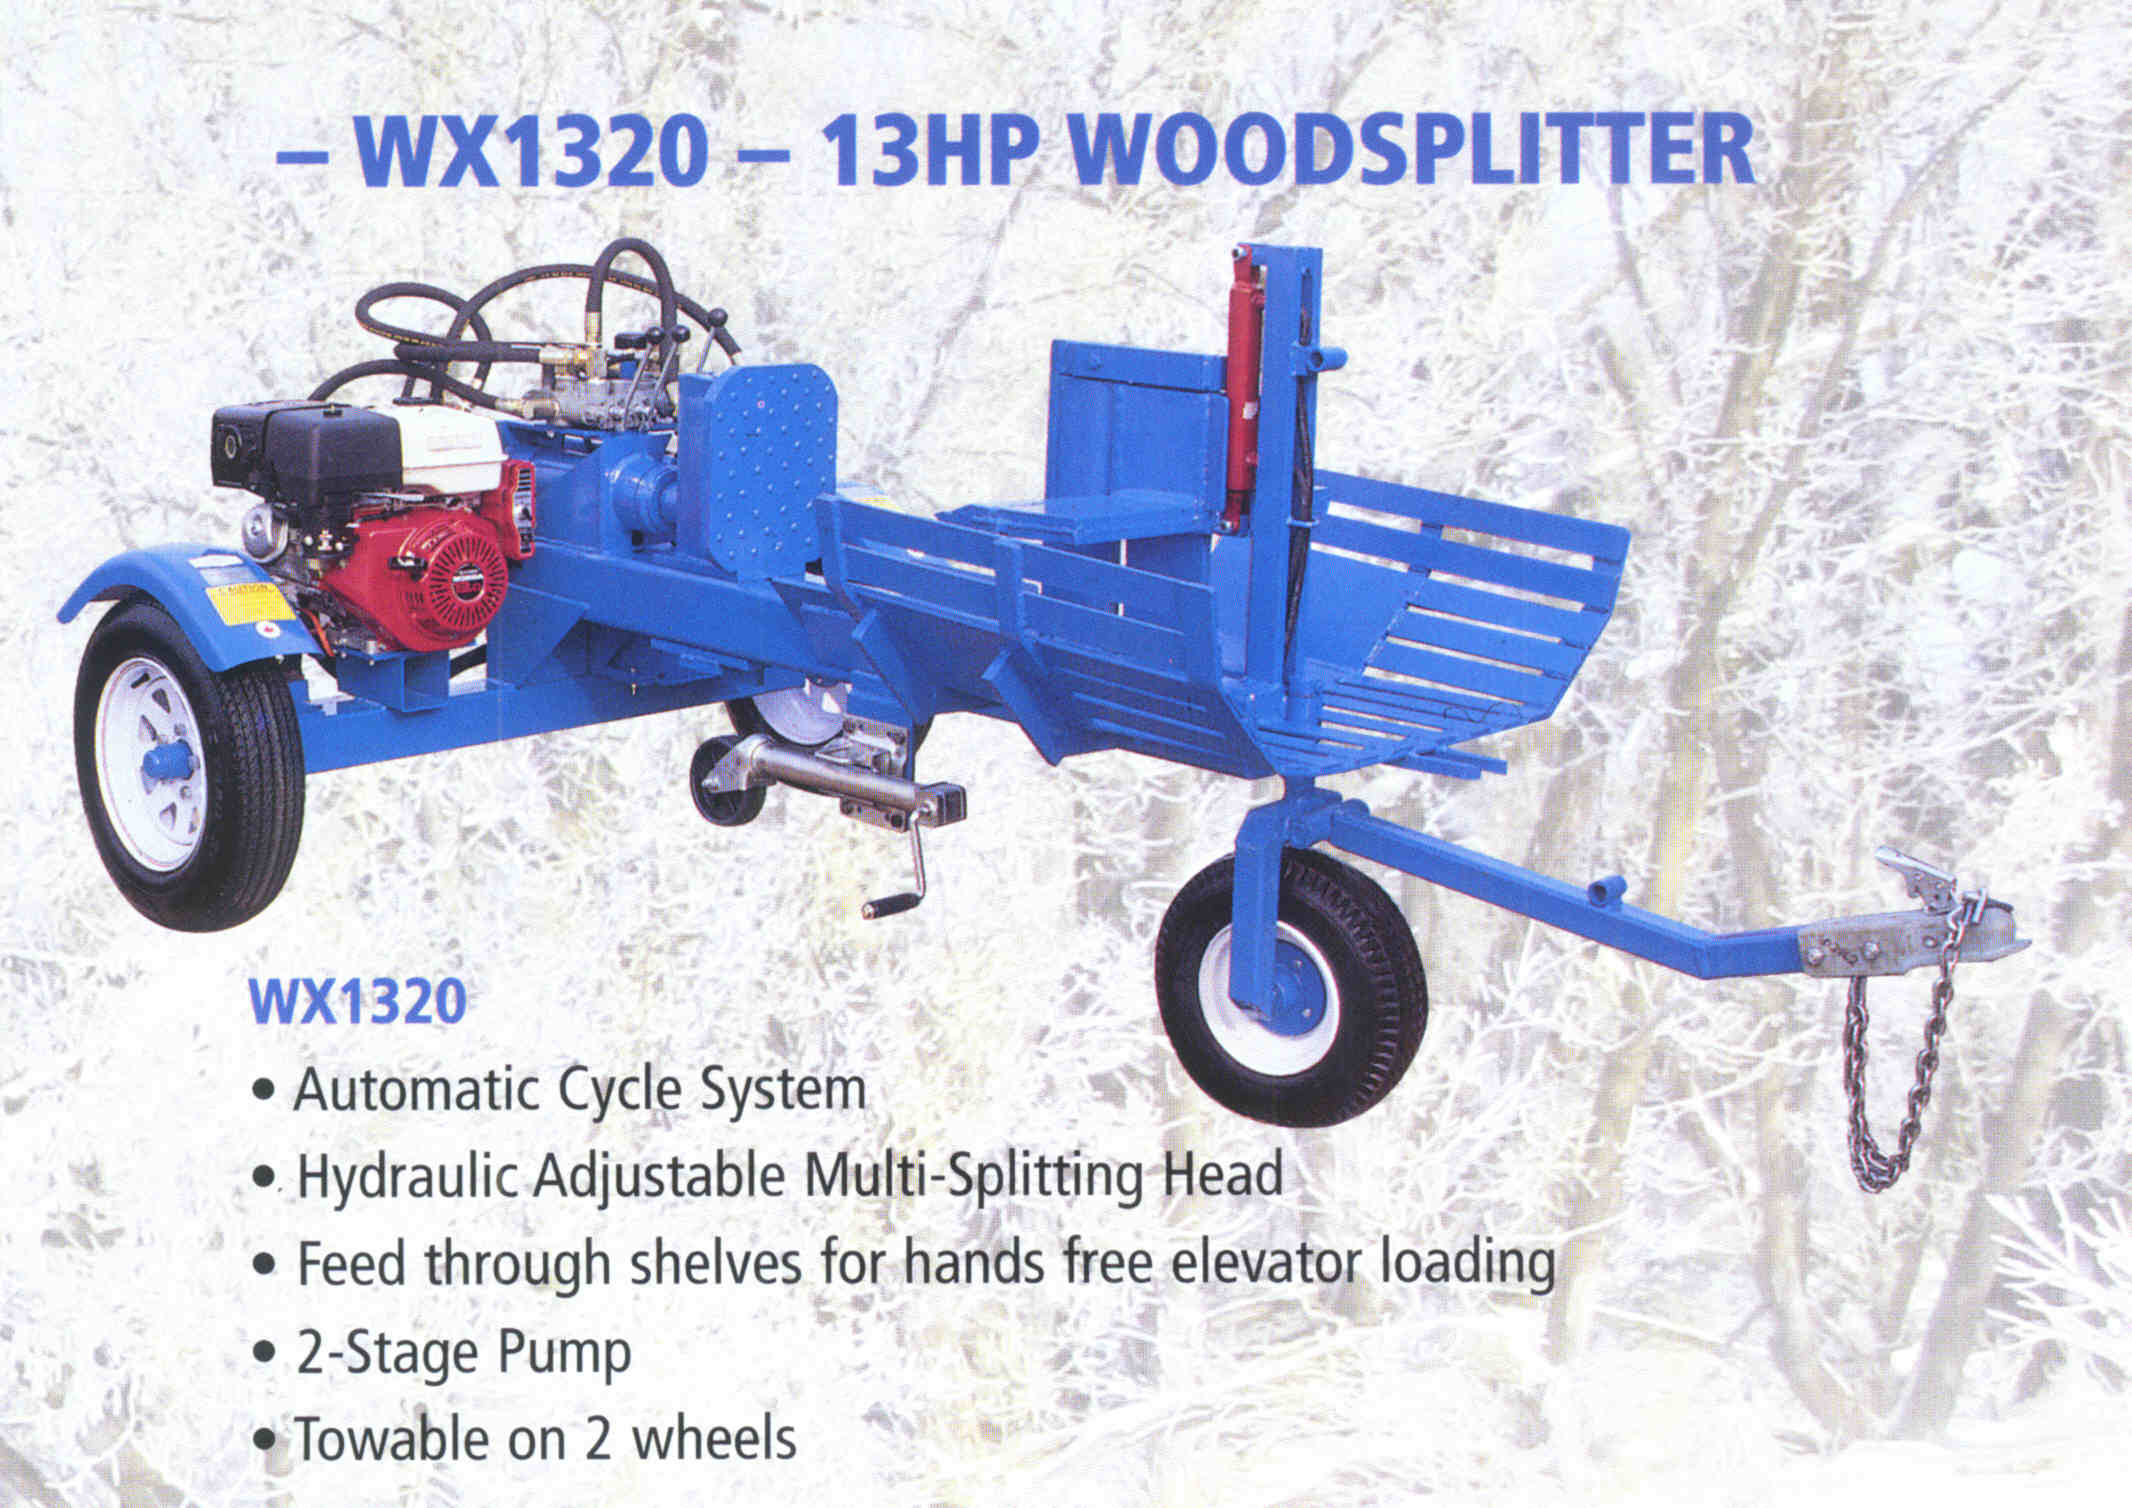 Trailer Mounted Logsplitter With 4-Way Wedge And Feed Through Shelves